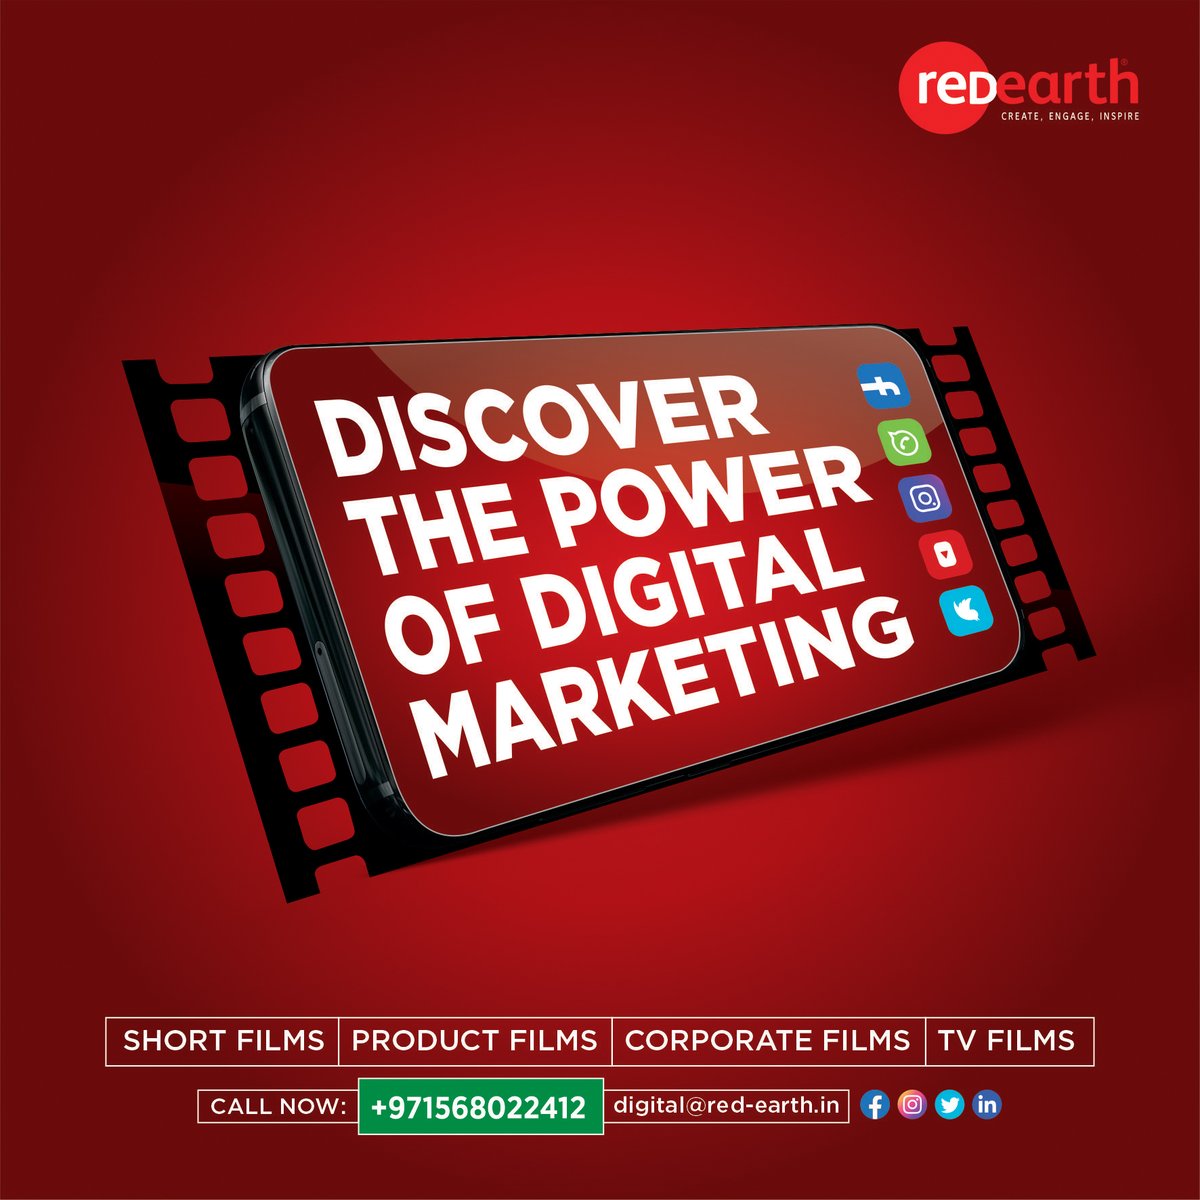 Elevate Your Brand with our Expertise.
Crafting excellence in Short Films, Product Films, Corporate Films, TV Films etc.
CALL NOW: +971568022412

#Redearth #redearthdubai
#corporatefilms #productfilms #adfilms #TVC #shortfilms #Adagency #ad #AdAgencyDubai